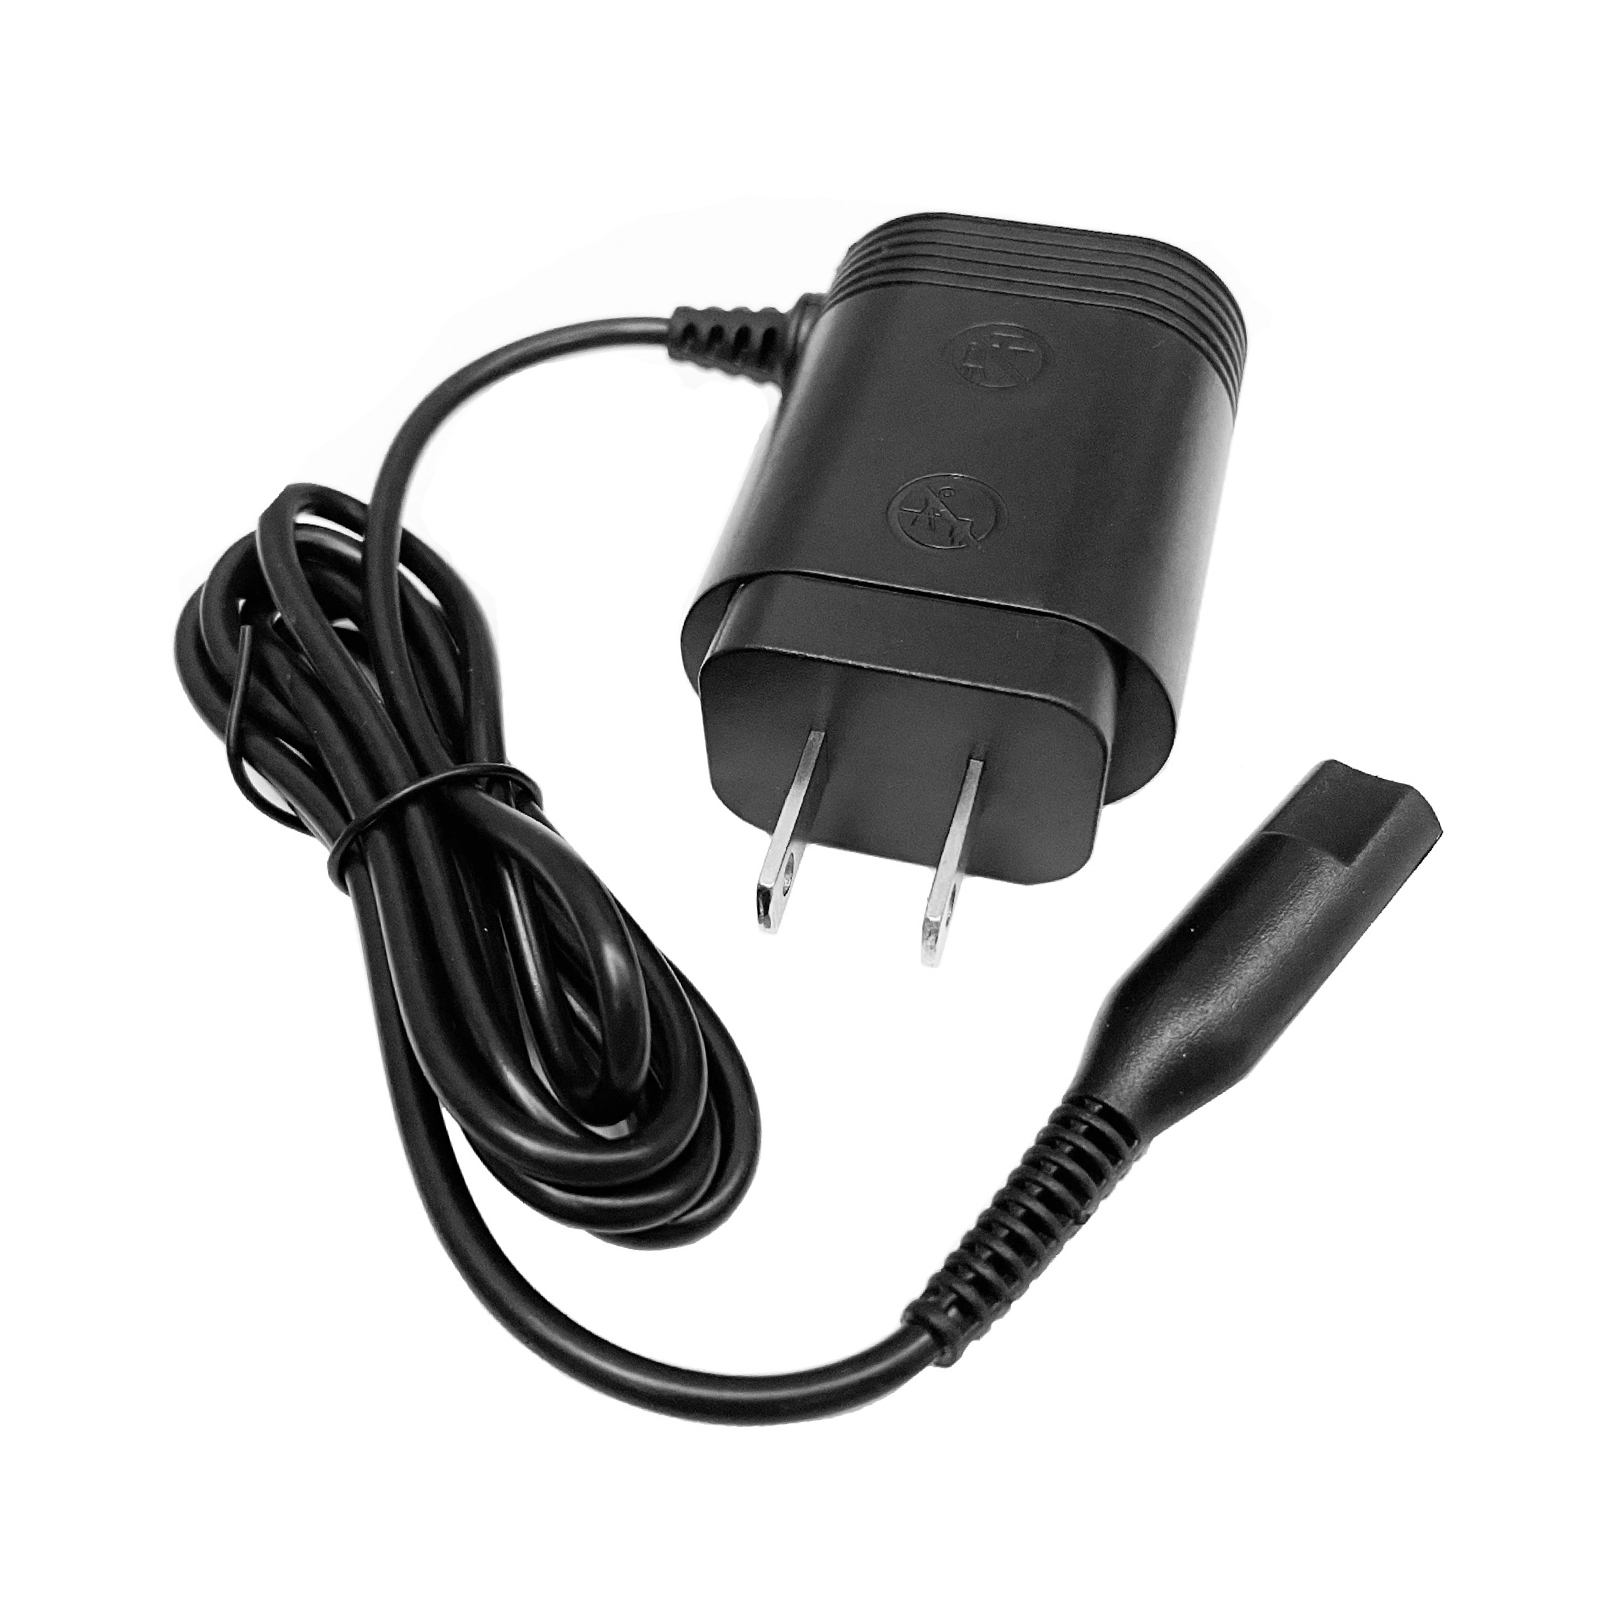 USED Charger power 12V Power Adapter for Braun Shaver 3 series 5 series 6